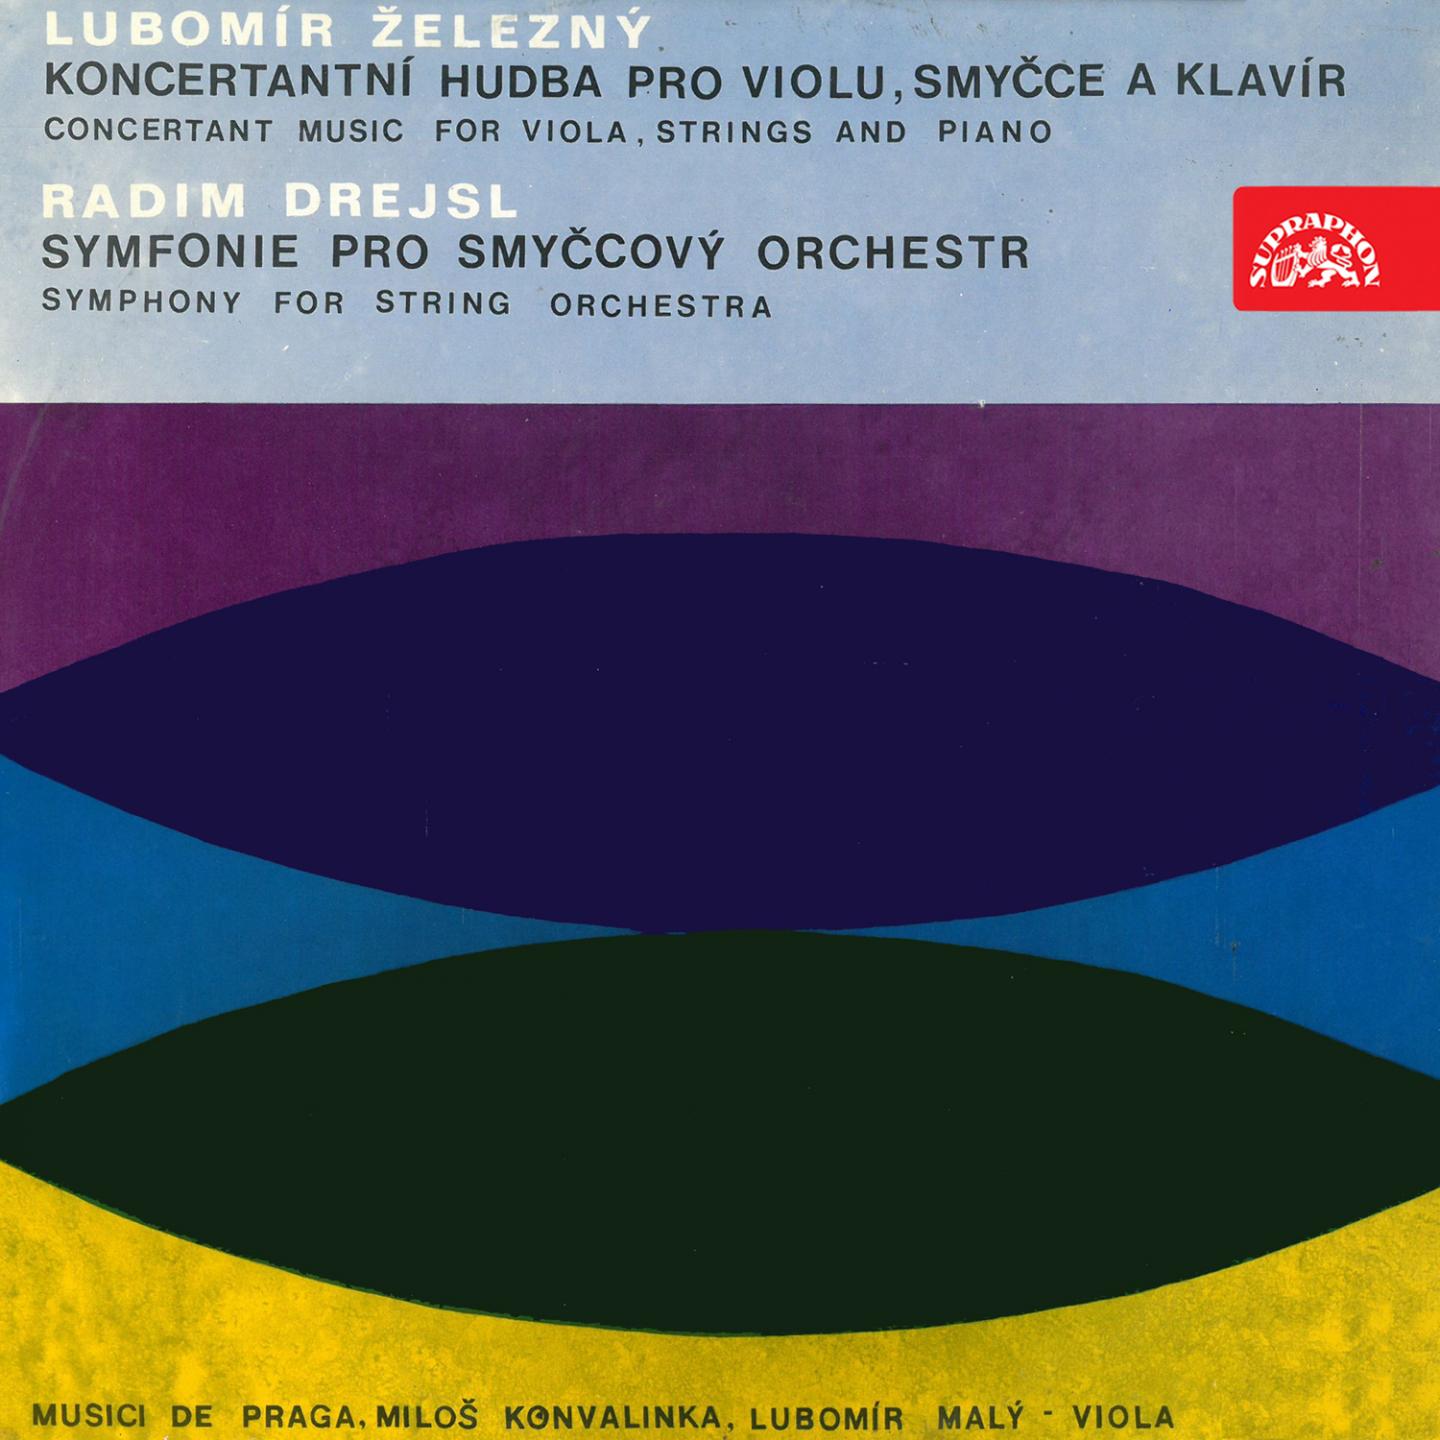 Symphony for Strings Orchestra: II. Elegia